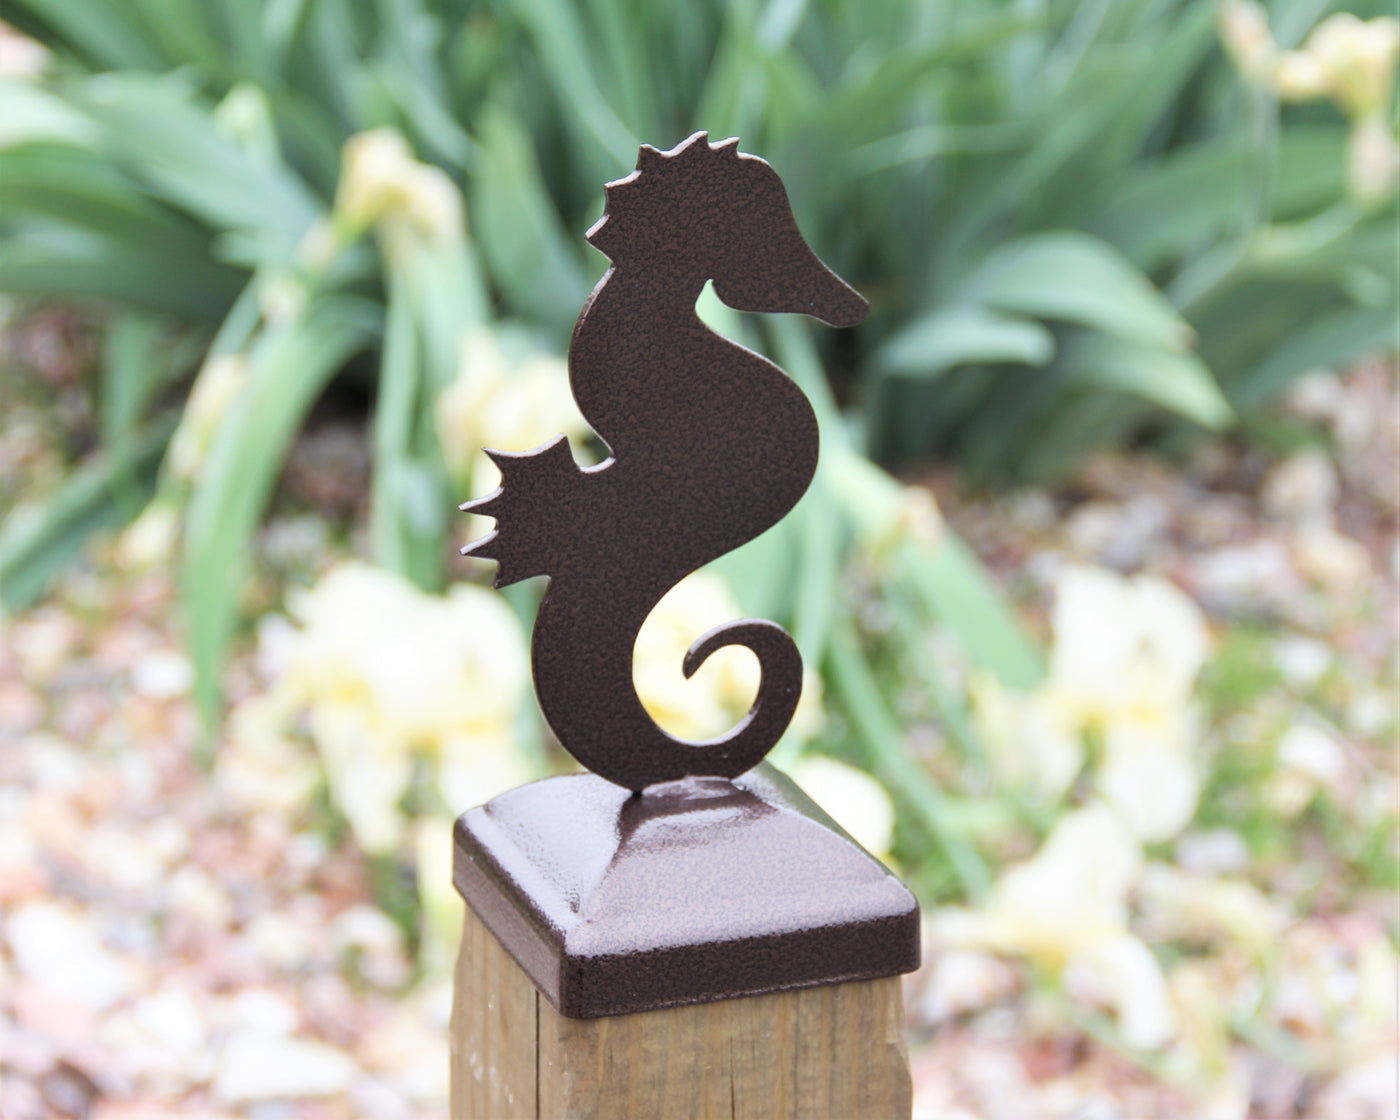 4x4 Seahorse Post Cap - Madison Iron and Wood - Post Cap - metal outdoor decor - Steel deocrations - american made products - veteran owned business products - fencing decorations - fencing supplies - custom wall decorations - personalized wall signs - steel - decorative post caps - steel post caps - metal post caps - brackets - structural brackets - home improvement - easter - easter decorations - easter gift - easter yard decor